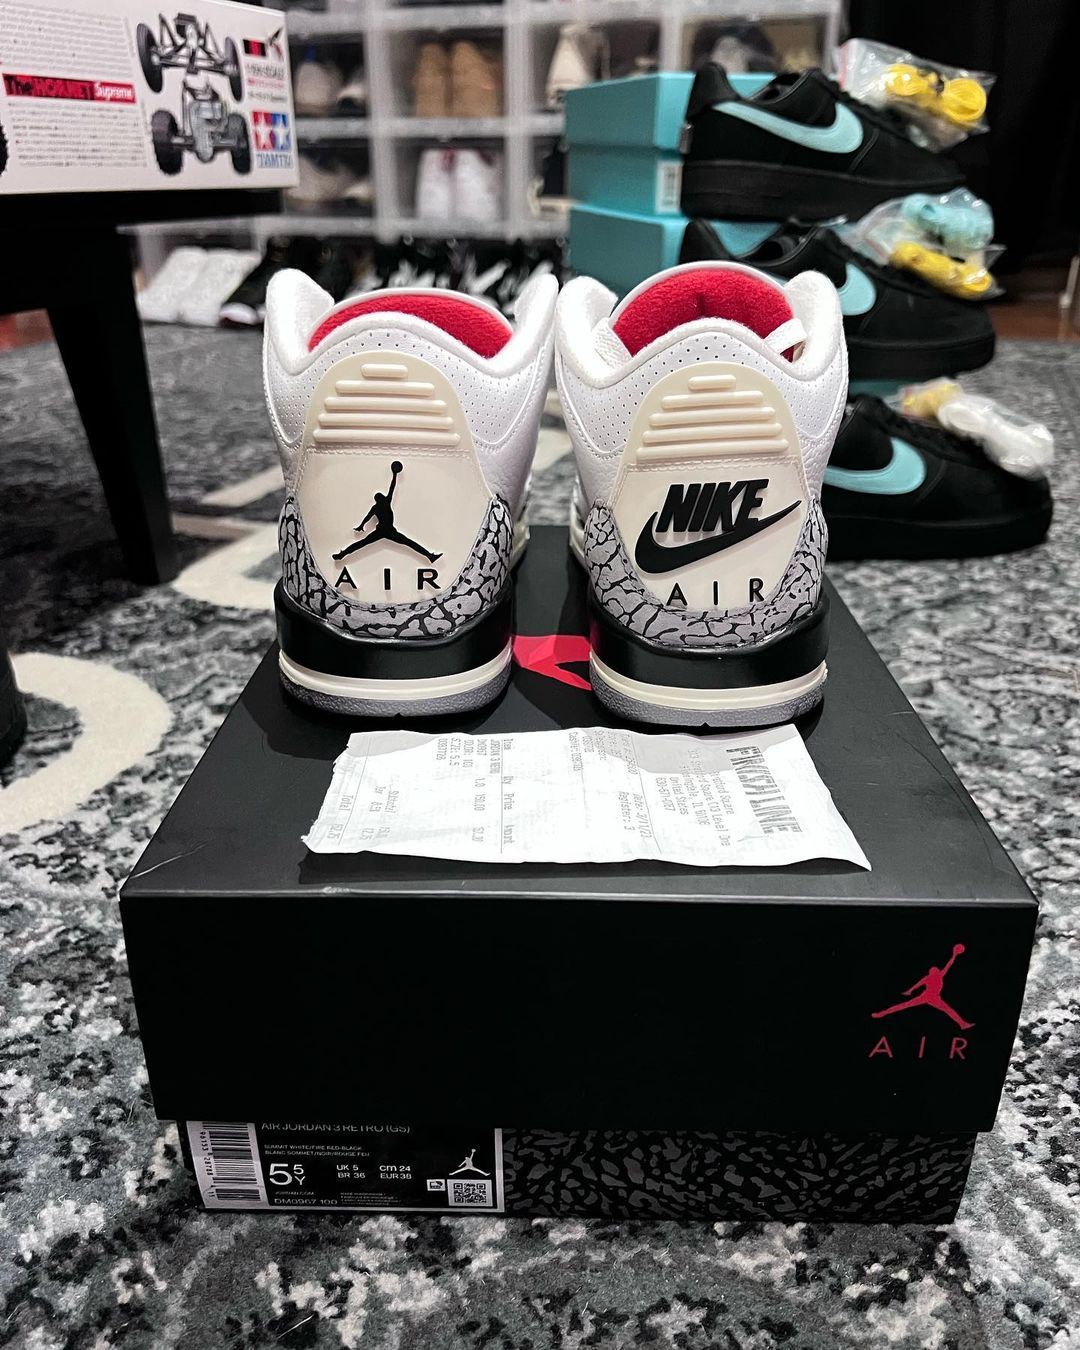 Quality control issues air jordan 3 white cement reimagined the site supply